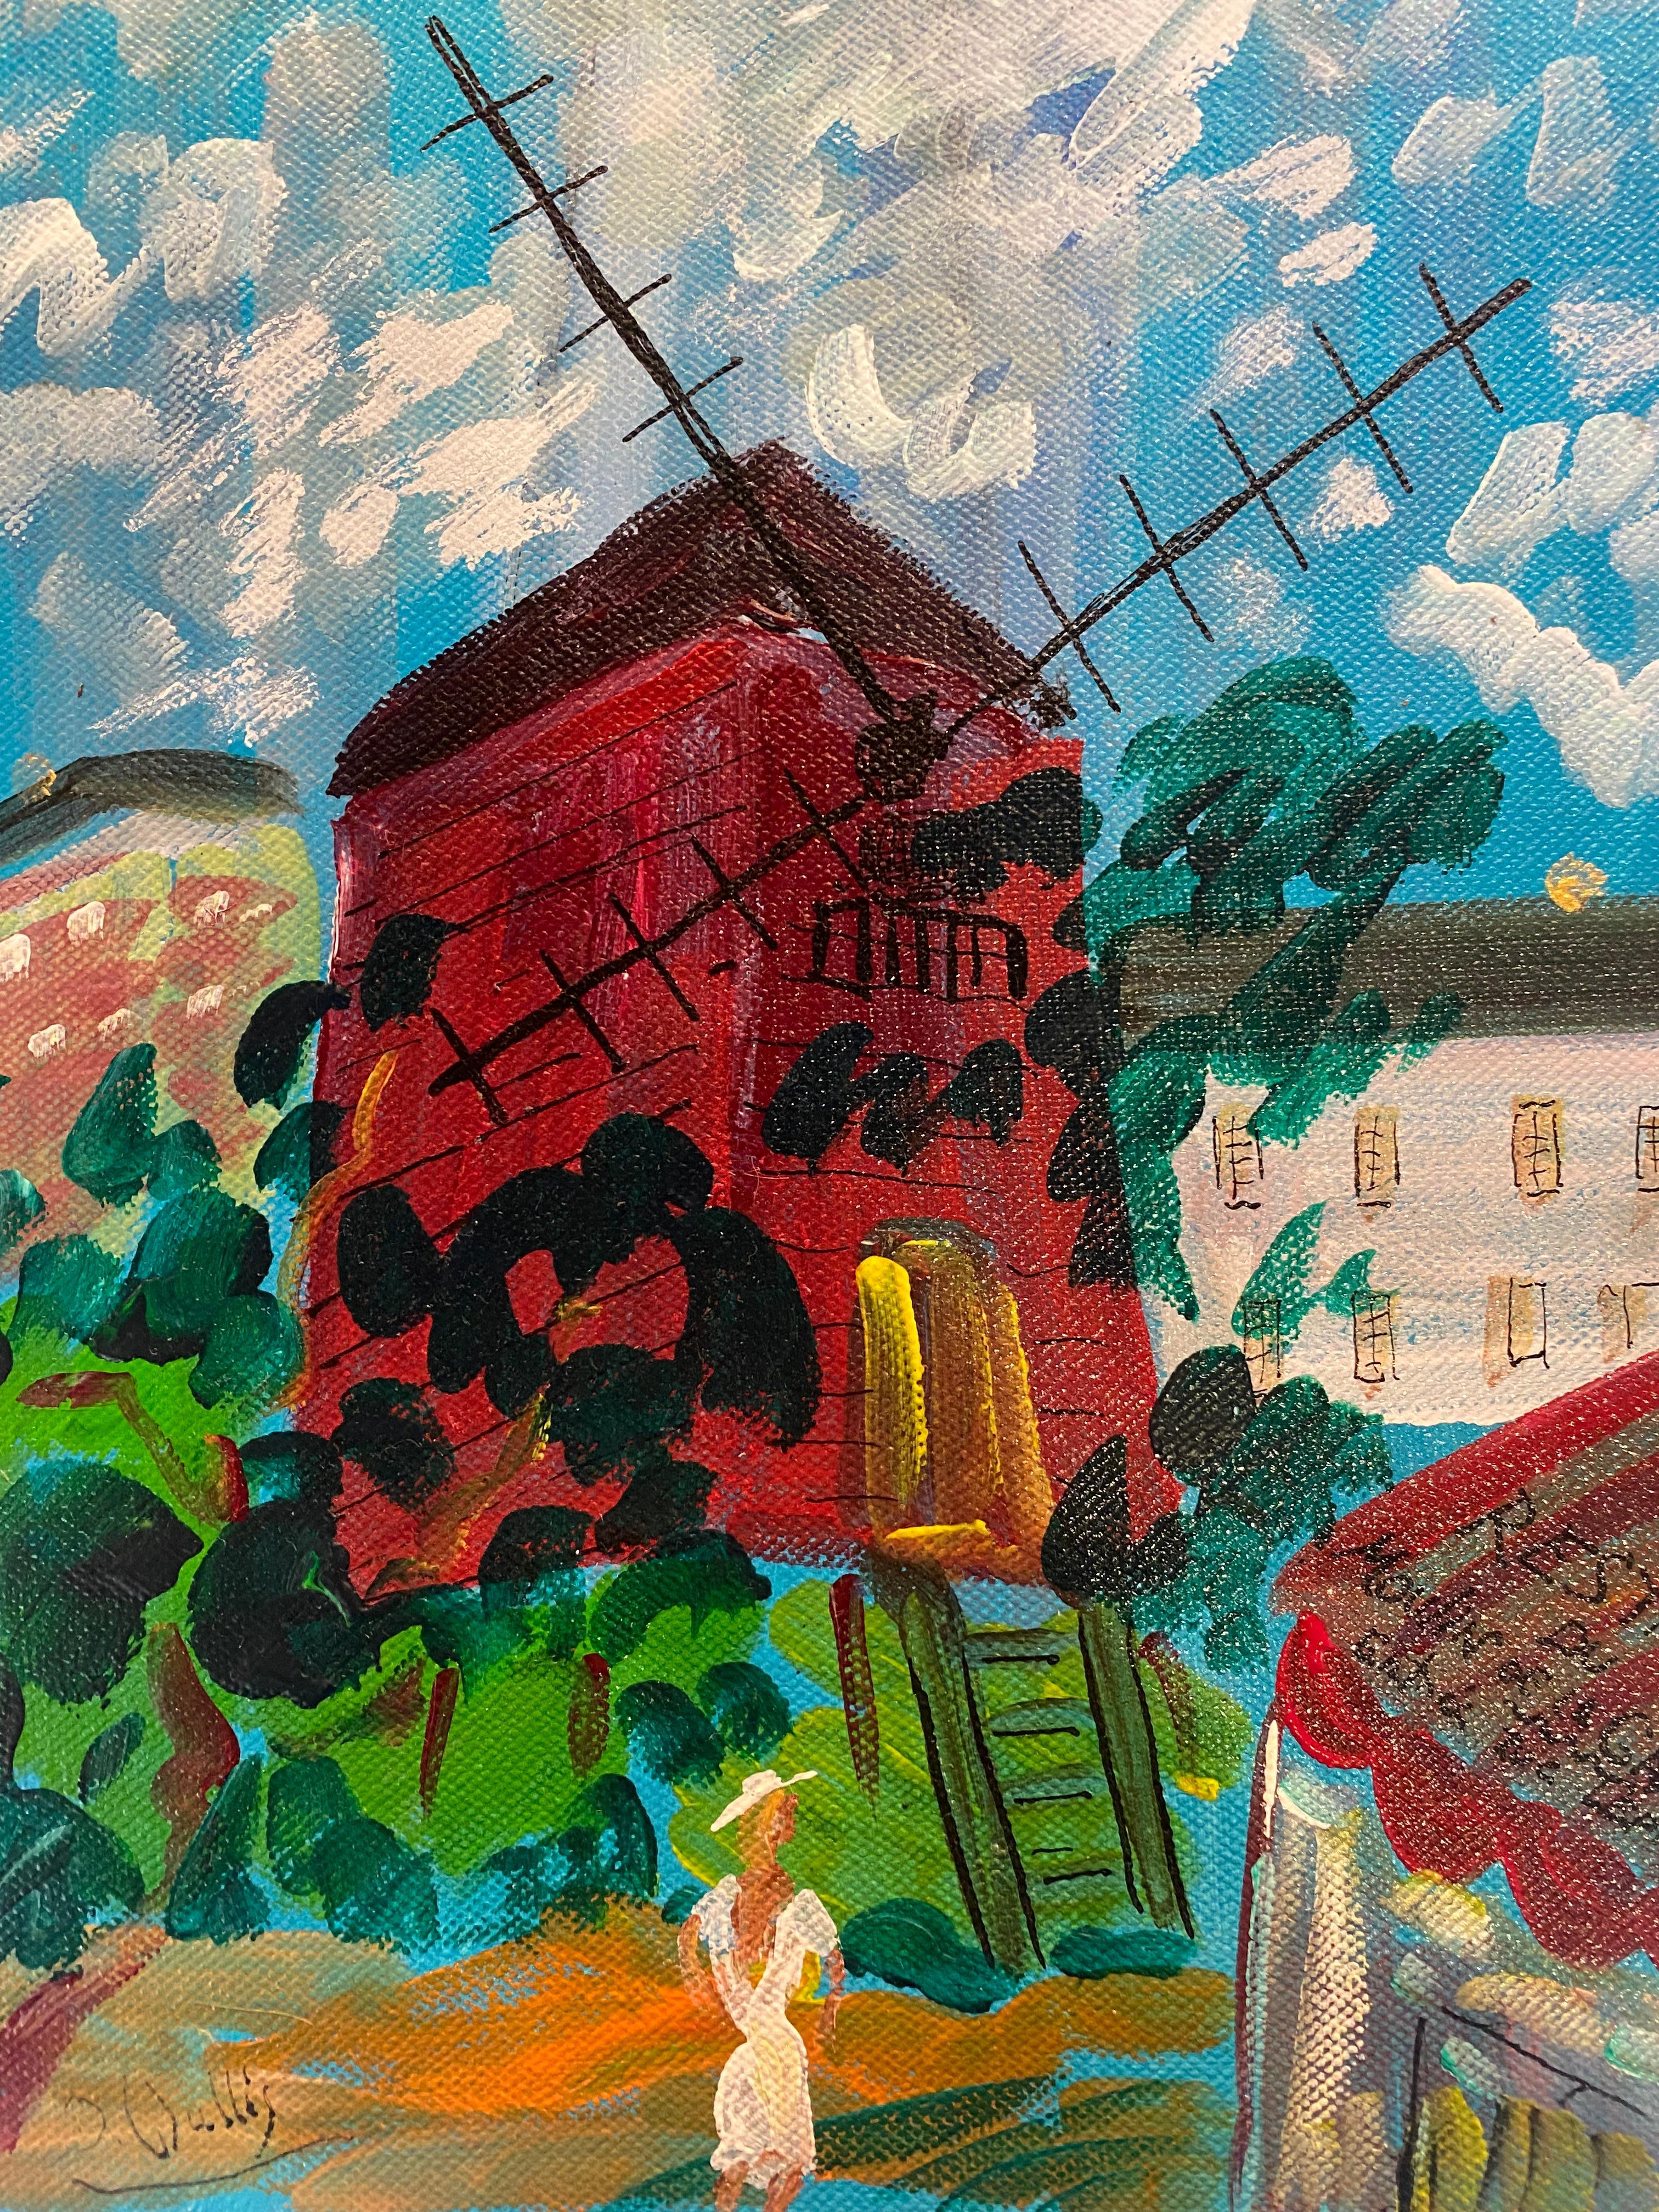 Jean Wallis
The mill of the galette 
Acrylic on canvas / stretcher 
2003
30 x 24 cms
Signed lower left 
Dedication on the back: amoureusement 
450 euros